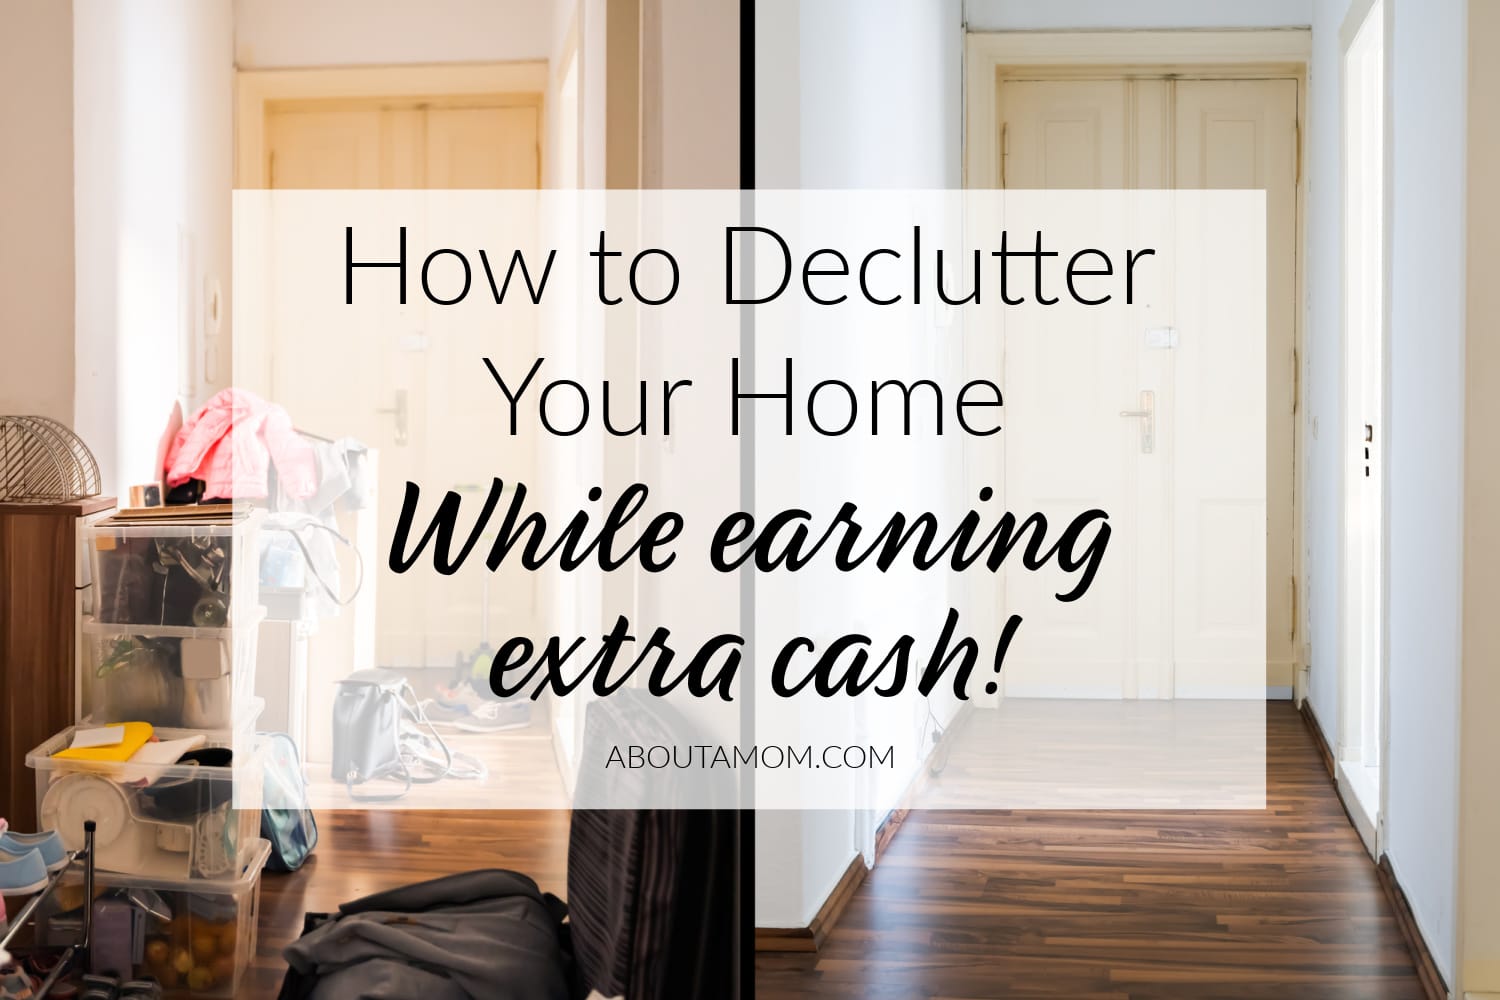 Let’s talk about how to declutter your home while earning extra cash! It's spring cleaning season, and now is the perfect time to declutter your home and maybe even earn a little extra cash in the process. During inflationary periods like this, every dollar counts.